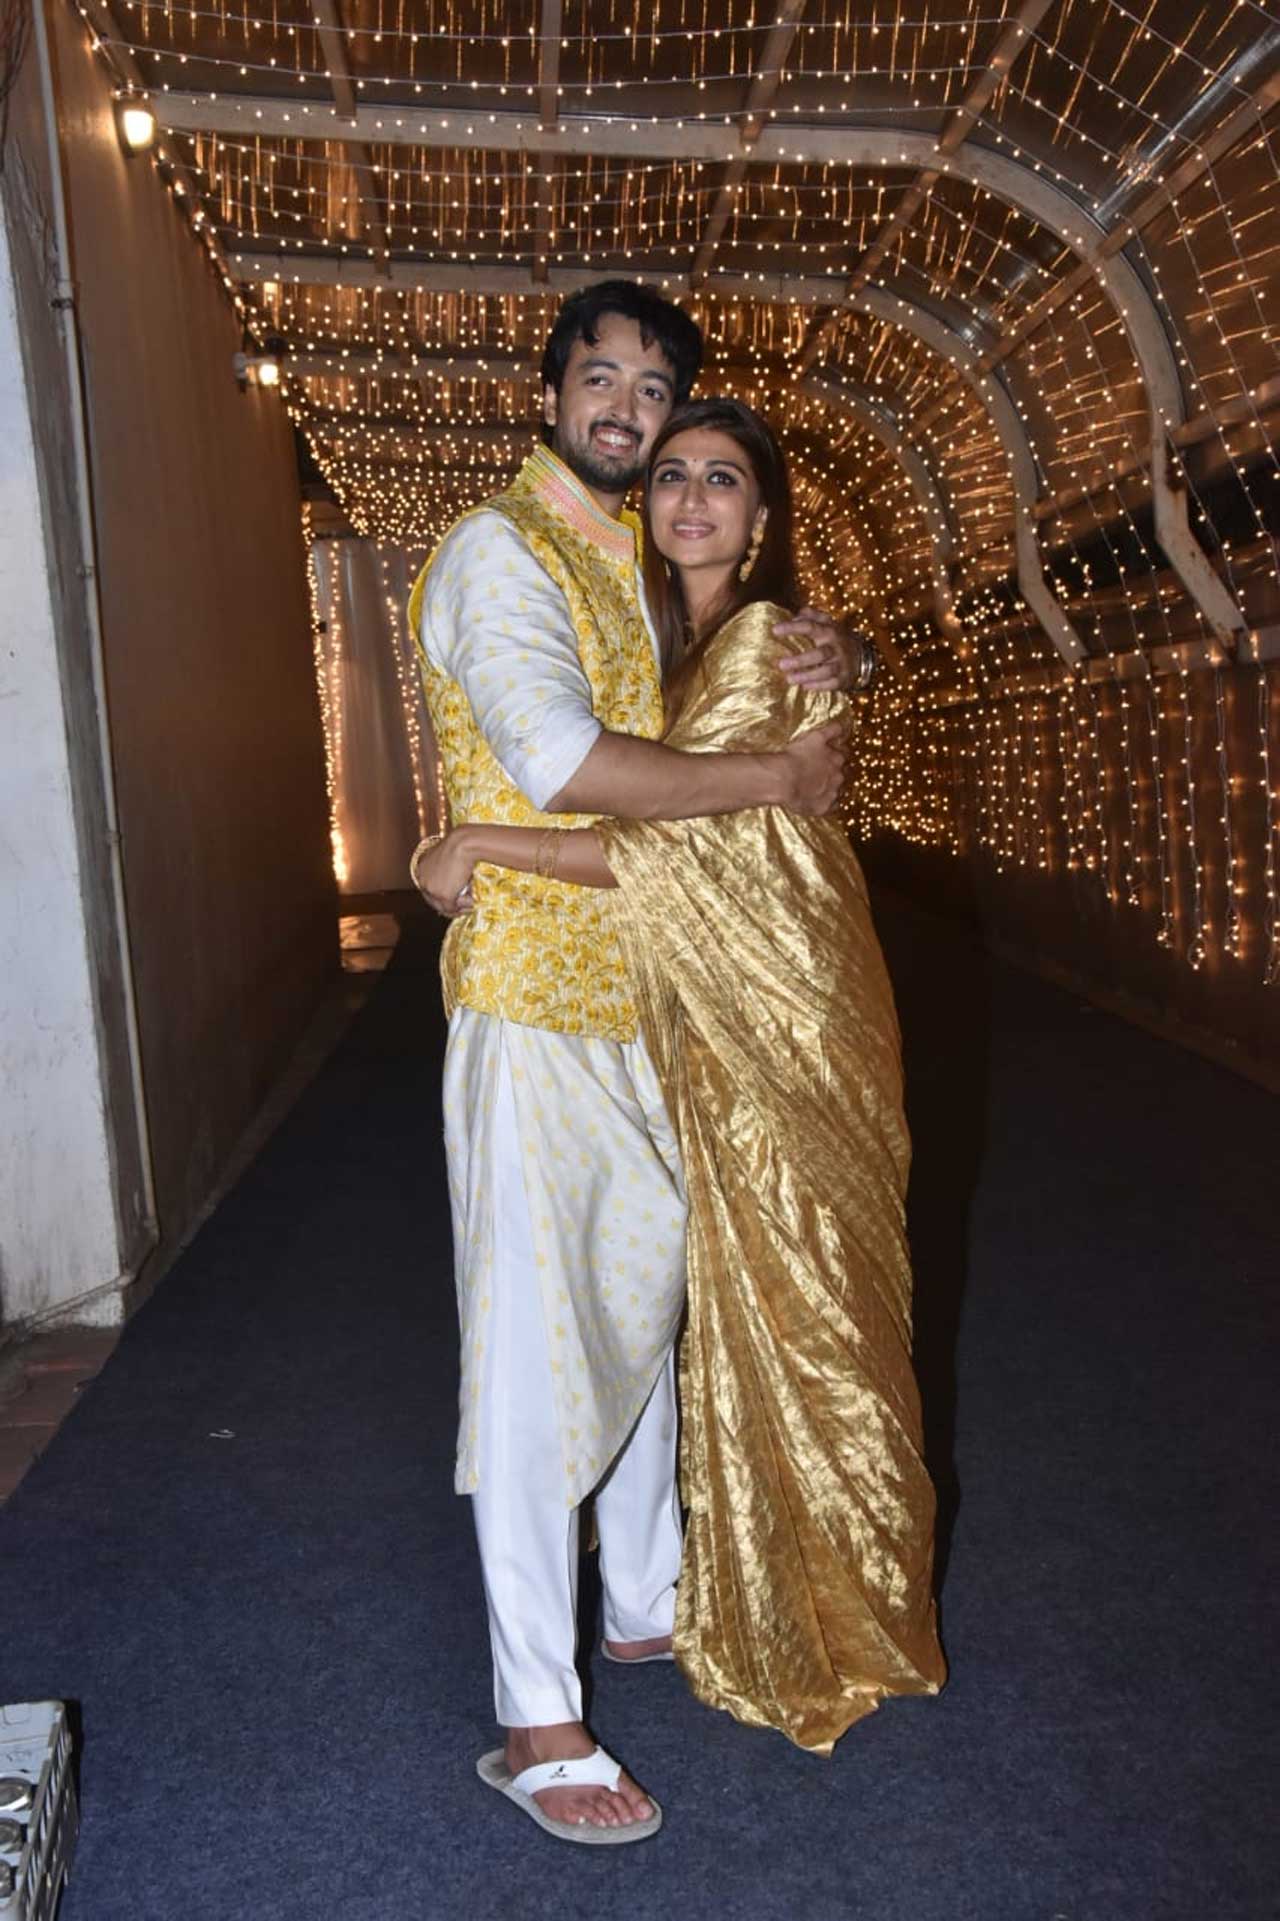 Priyaank K Sharma and Shaza Morani posed for the paparazzi after their wedding ceremony hosted in the city. Priyaank showed off his uber-cool side in a yellow Nehru jacket, paired with a white kurta-pyjama. Shaza Morani flaunted her million-dollar smile wearing a pretty golden saree she opted for the special day.